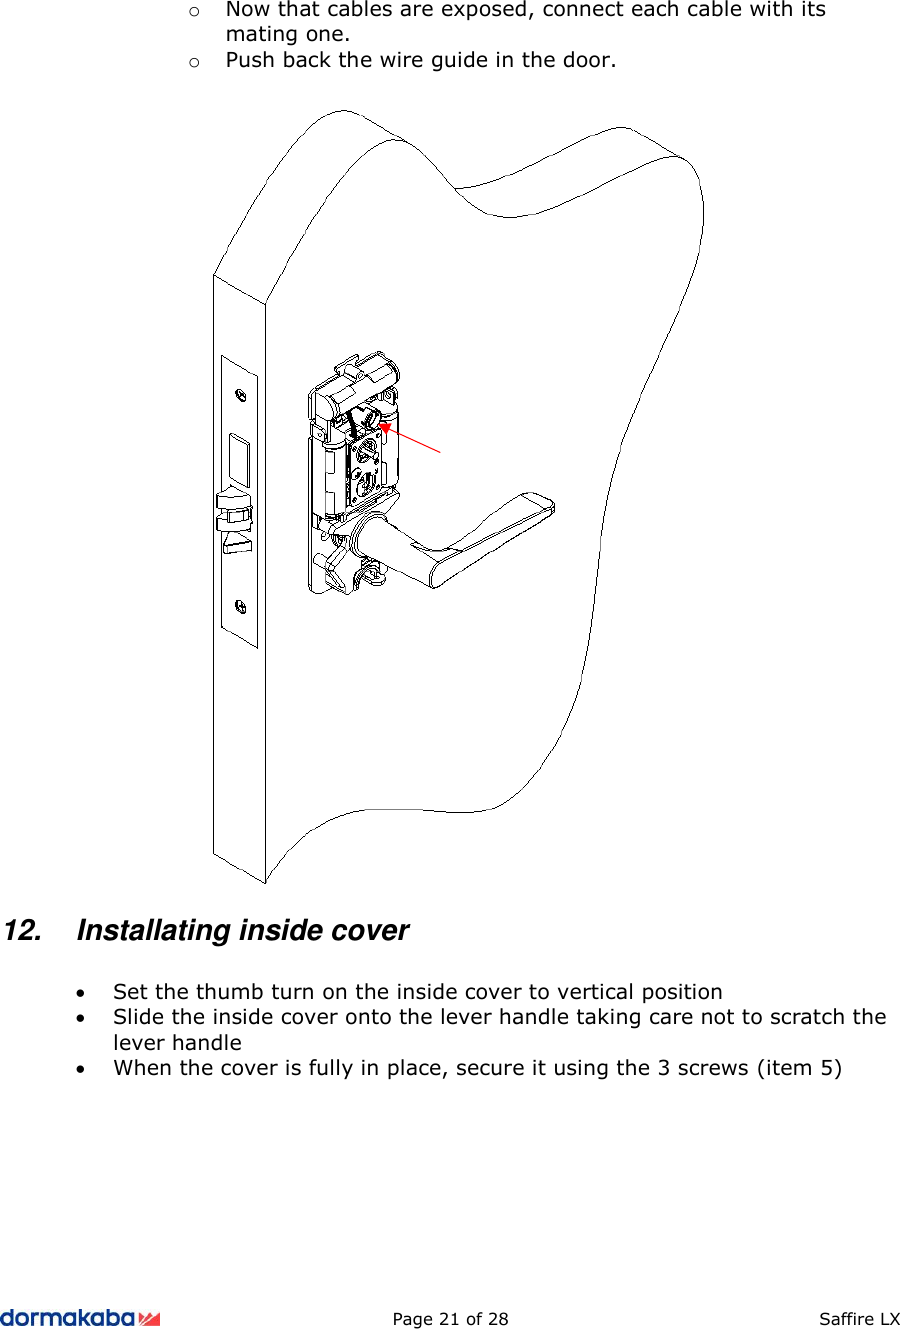          Page 21 of 28  Saffire LX       o Now that cables are exposed, connect each cable with its mating one. o Push back the wire guide in the door.   12.  Installating inside cover  • Set the thumb turn on the inside cover to vertical position • Slide the inside cover onto the lever handle taking care not to scratch the lever handle • When the cover is fully in place, secure it using the 3 screws (item 5) 